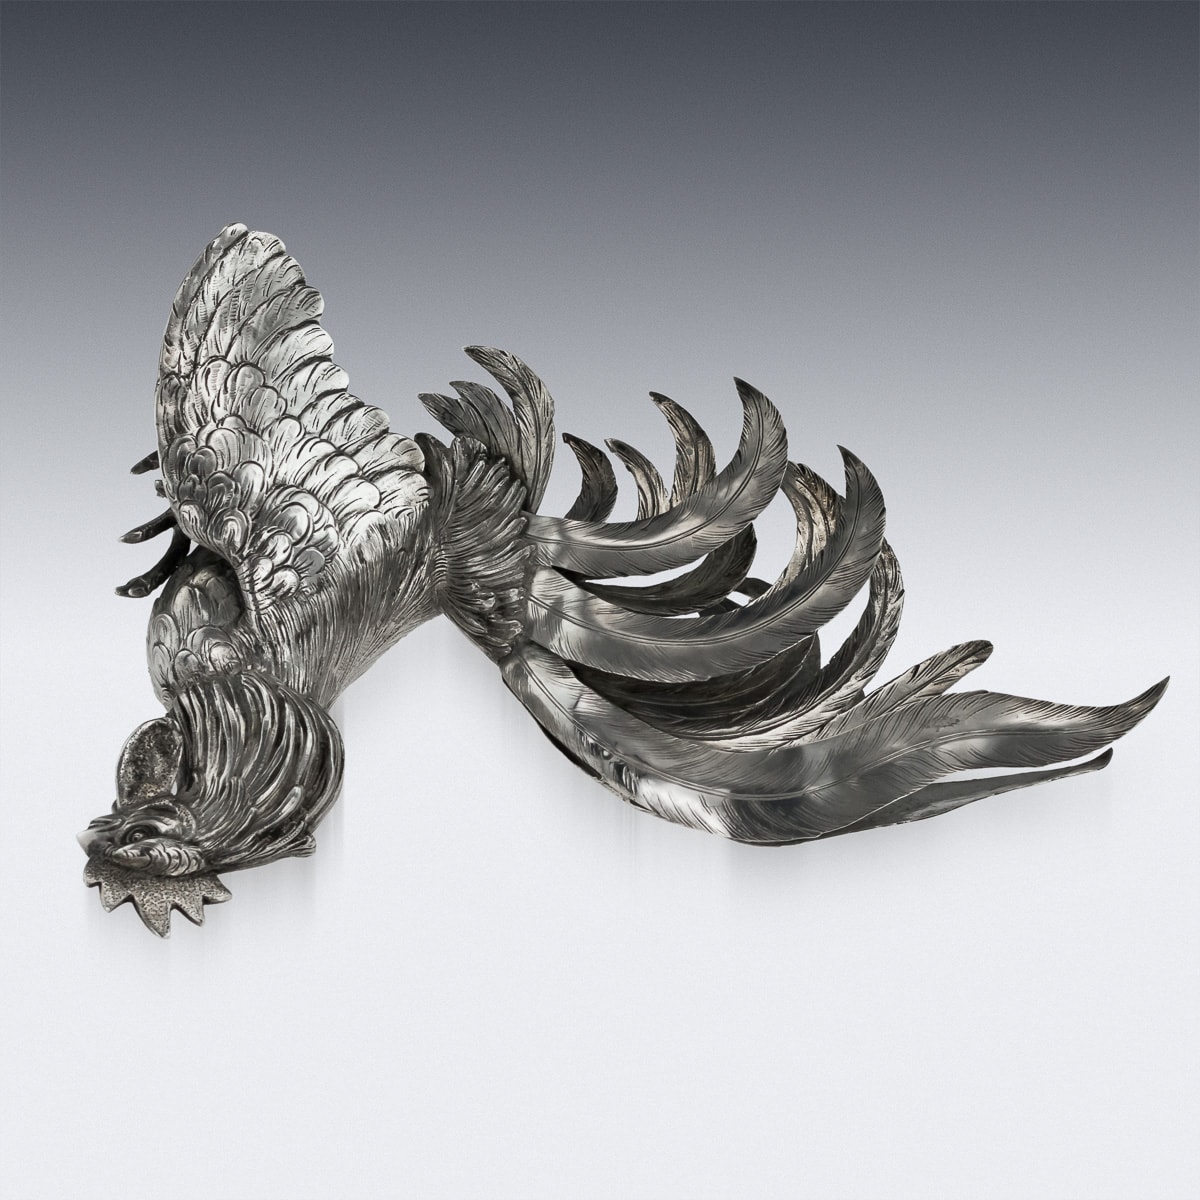 A PAIR OF GERMAN SILVER TABLE ORNAMENTS MODELLED AS FIGHTING COCKERELS - Image 20 of 41